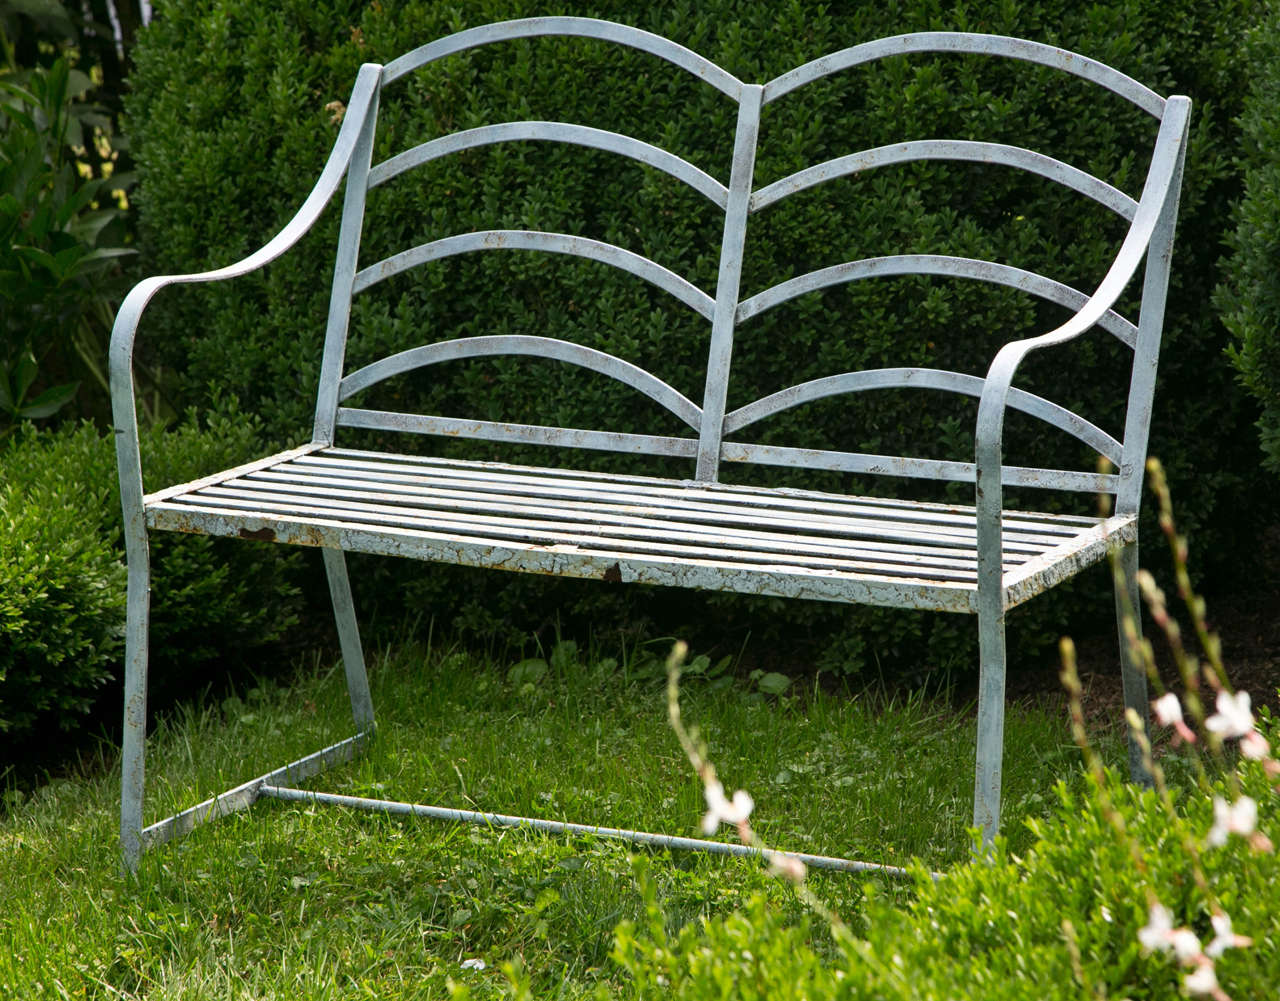 A small wrought-iron Regency-style seat.